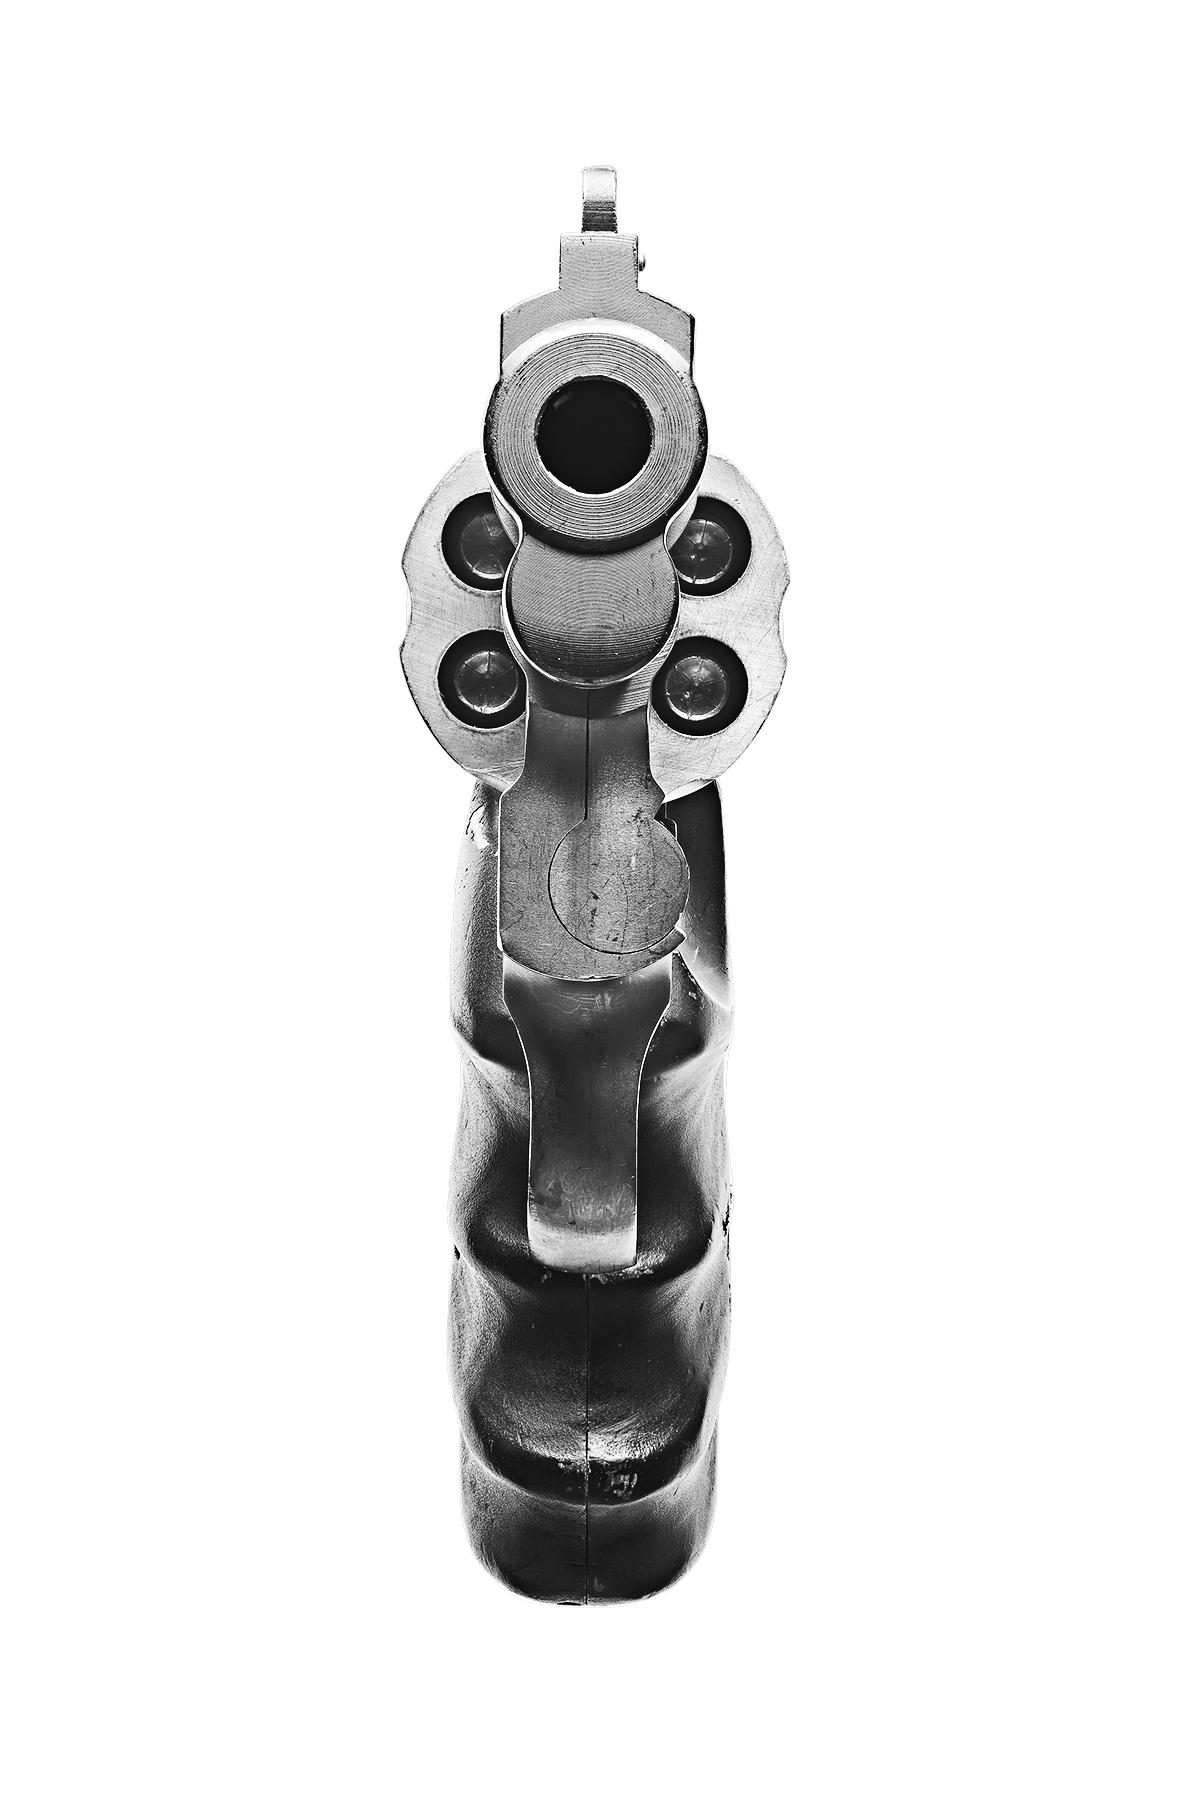 S&W .357 Magnum
Digital C-Print / Archival Pigment Print
Edition of 20 per size
Available sizes:
36 x 72 in
48 x 96 in

In Point Blank, Lusztyk’s magnification of handguns at once anthropomorphizes and abstracts its subject to create demystified